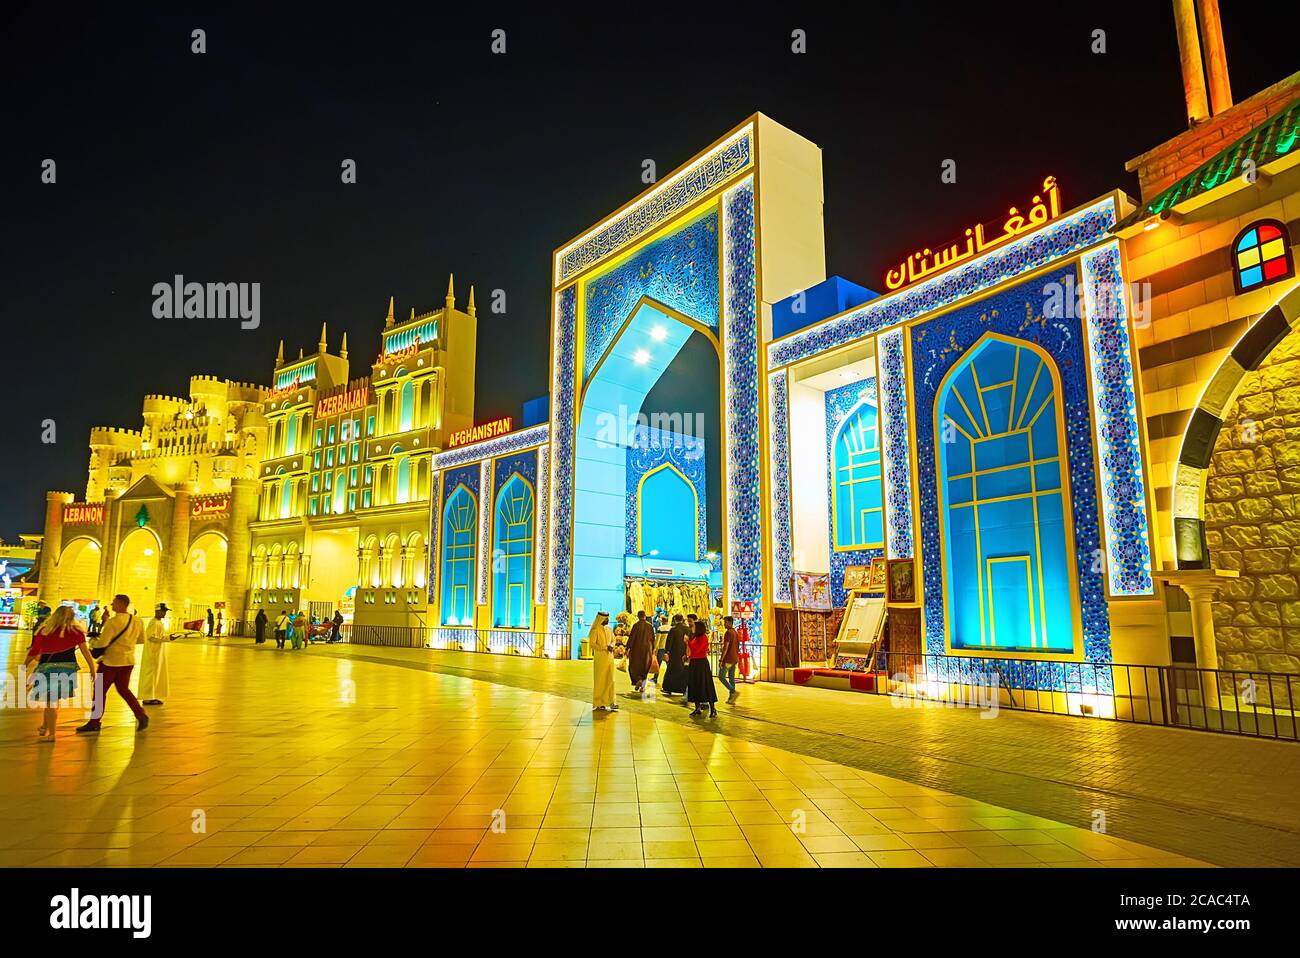 DUBAI, UAE - MARCH 5, 2020: The bright blue portal of Afghanistan pavilion in Global Village Dubai, decorated with Islamic patterns and calligraphy, e Stock Photo